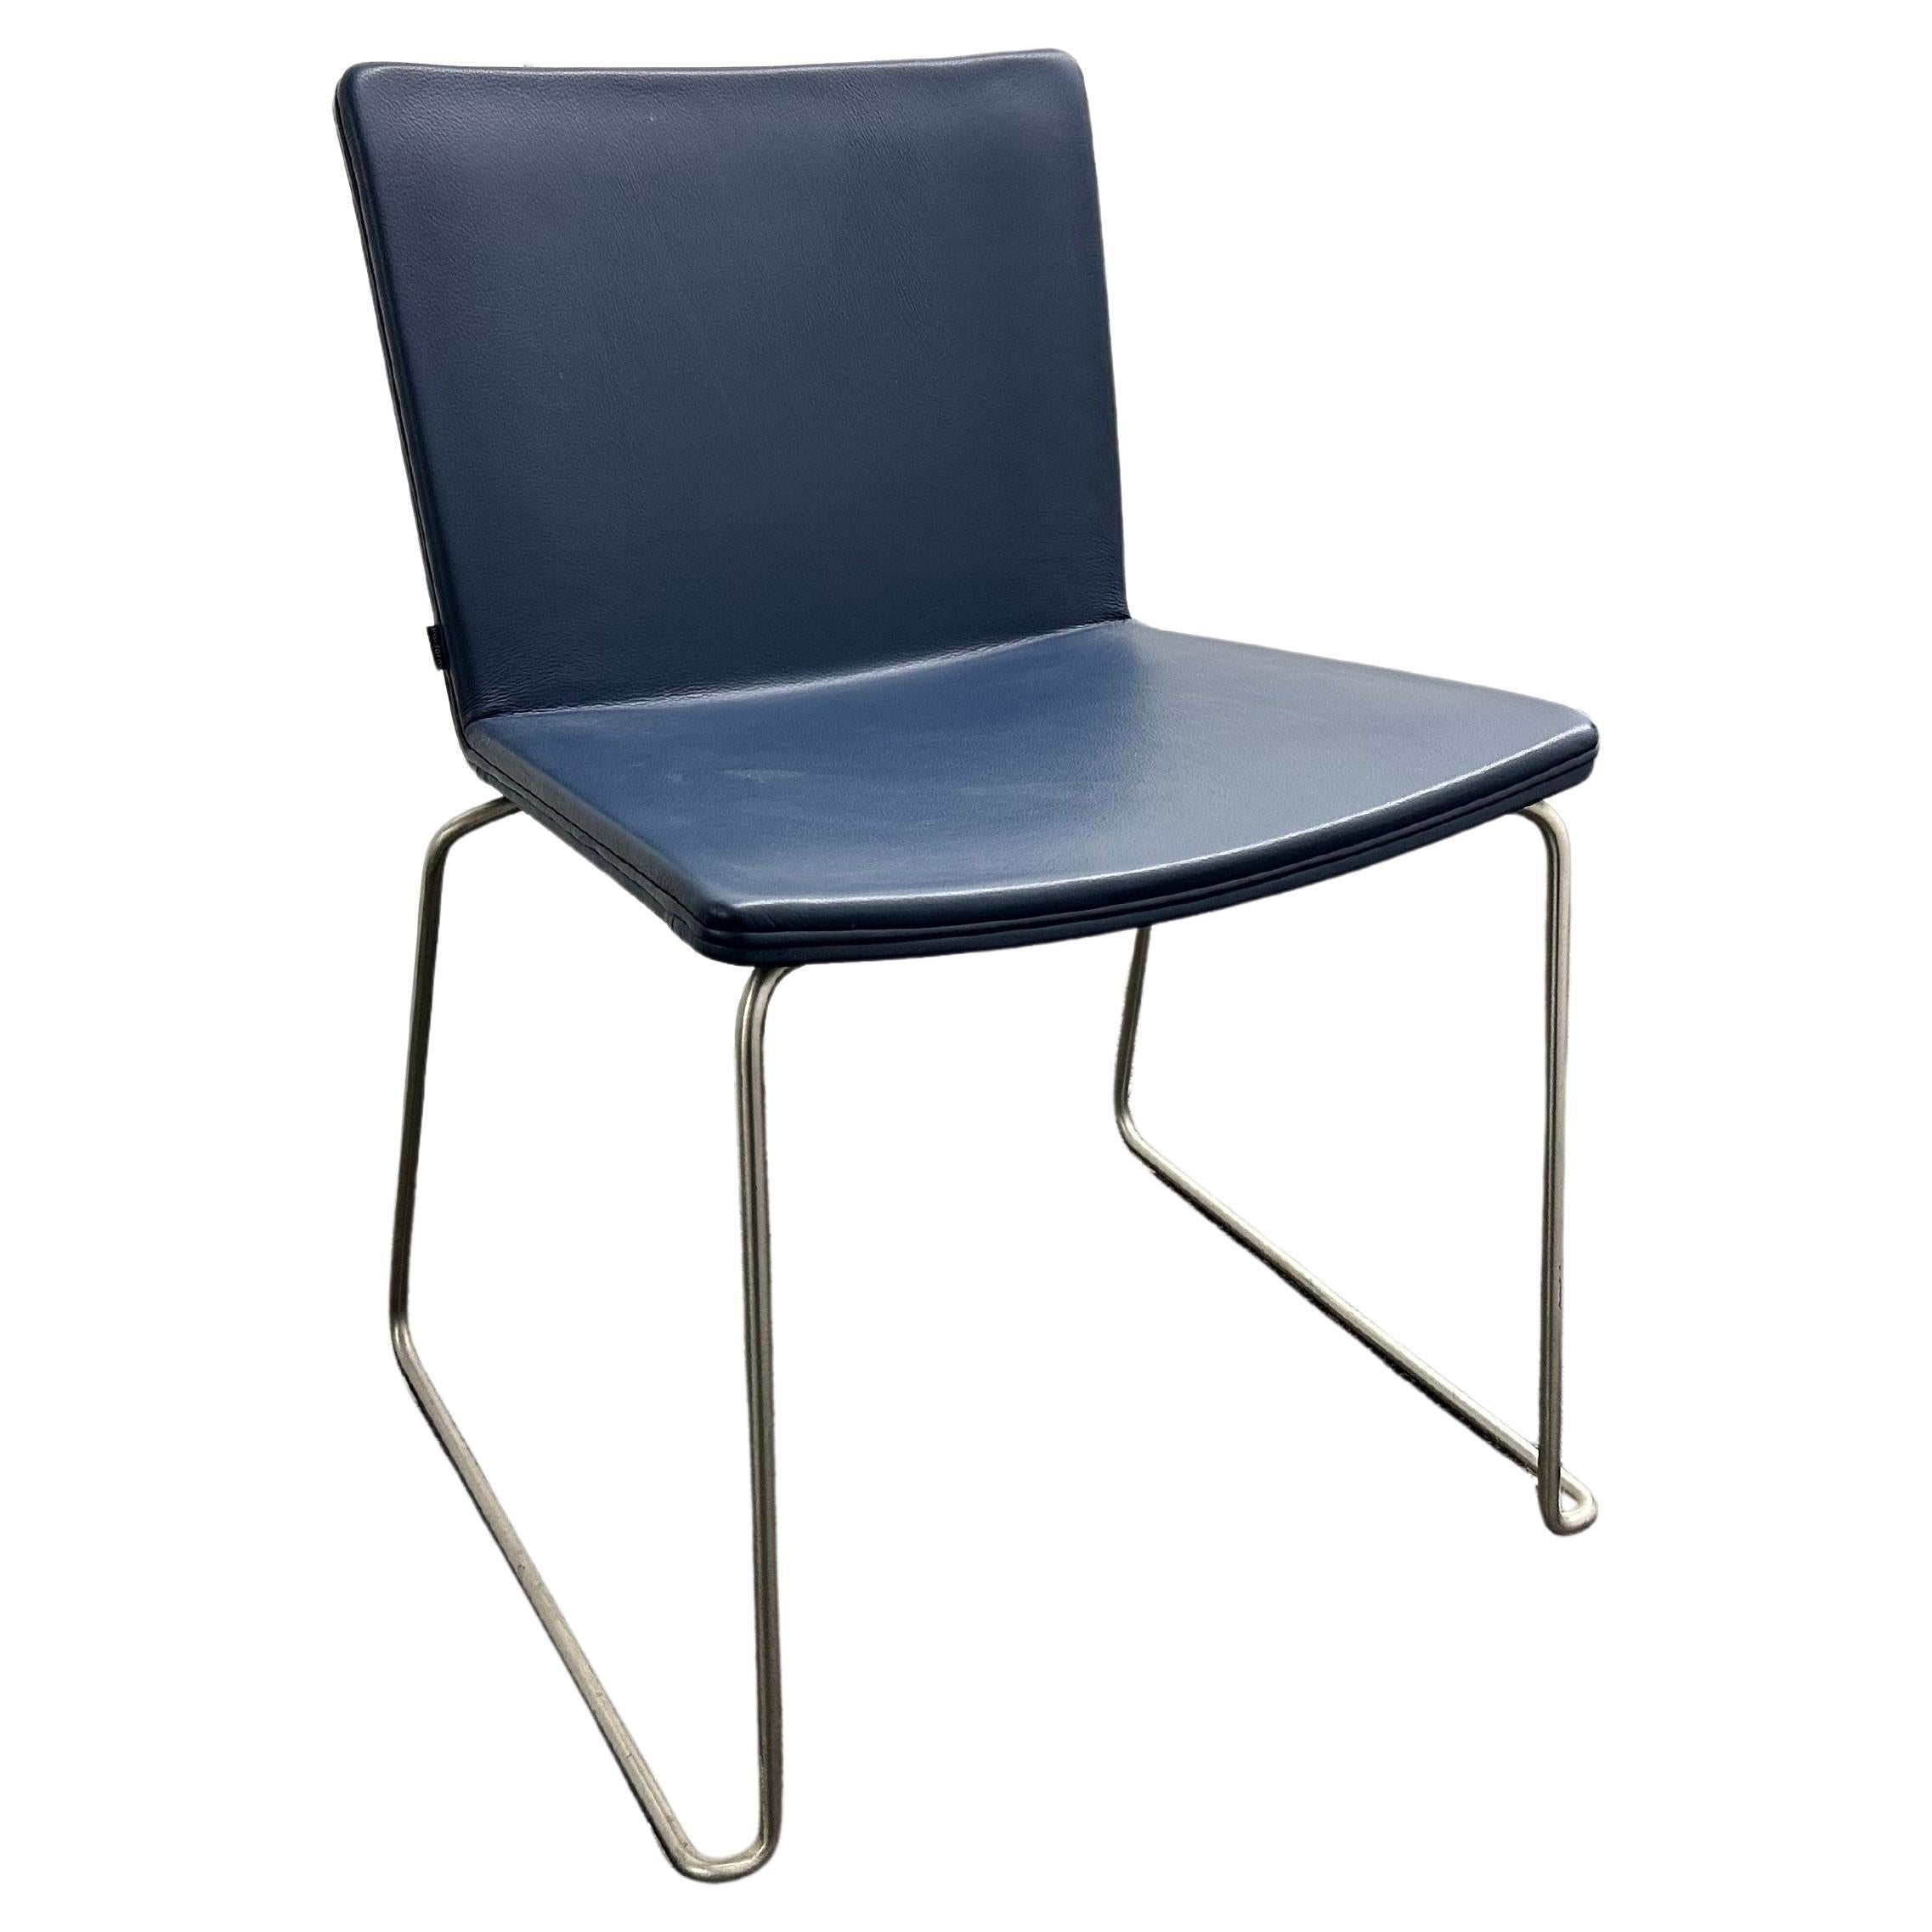 Poliform "Nex" Italian Leather Chairs by Mario Mazzer, Set of 4 For Sale